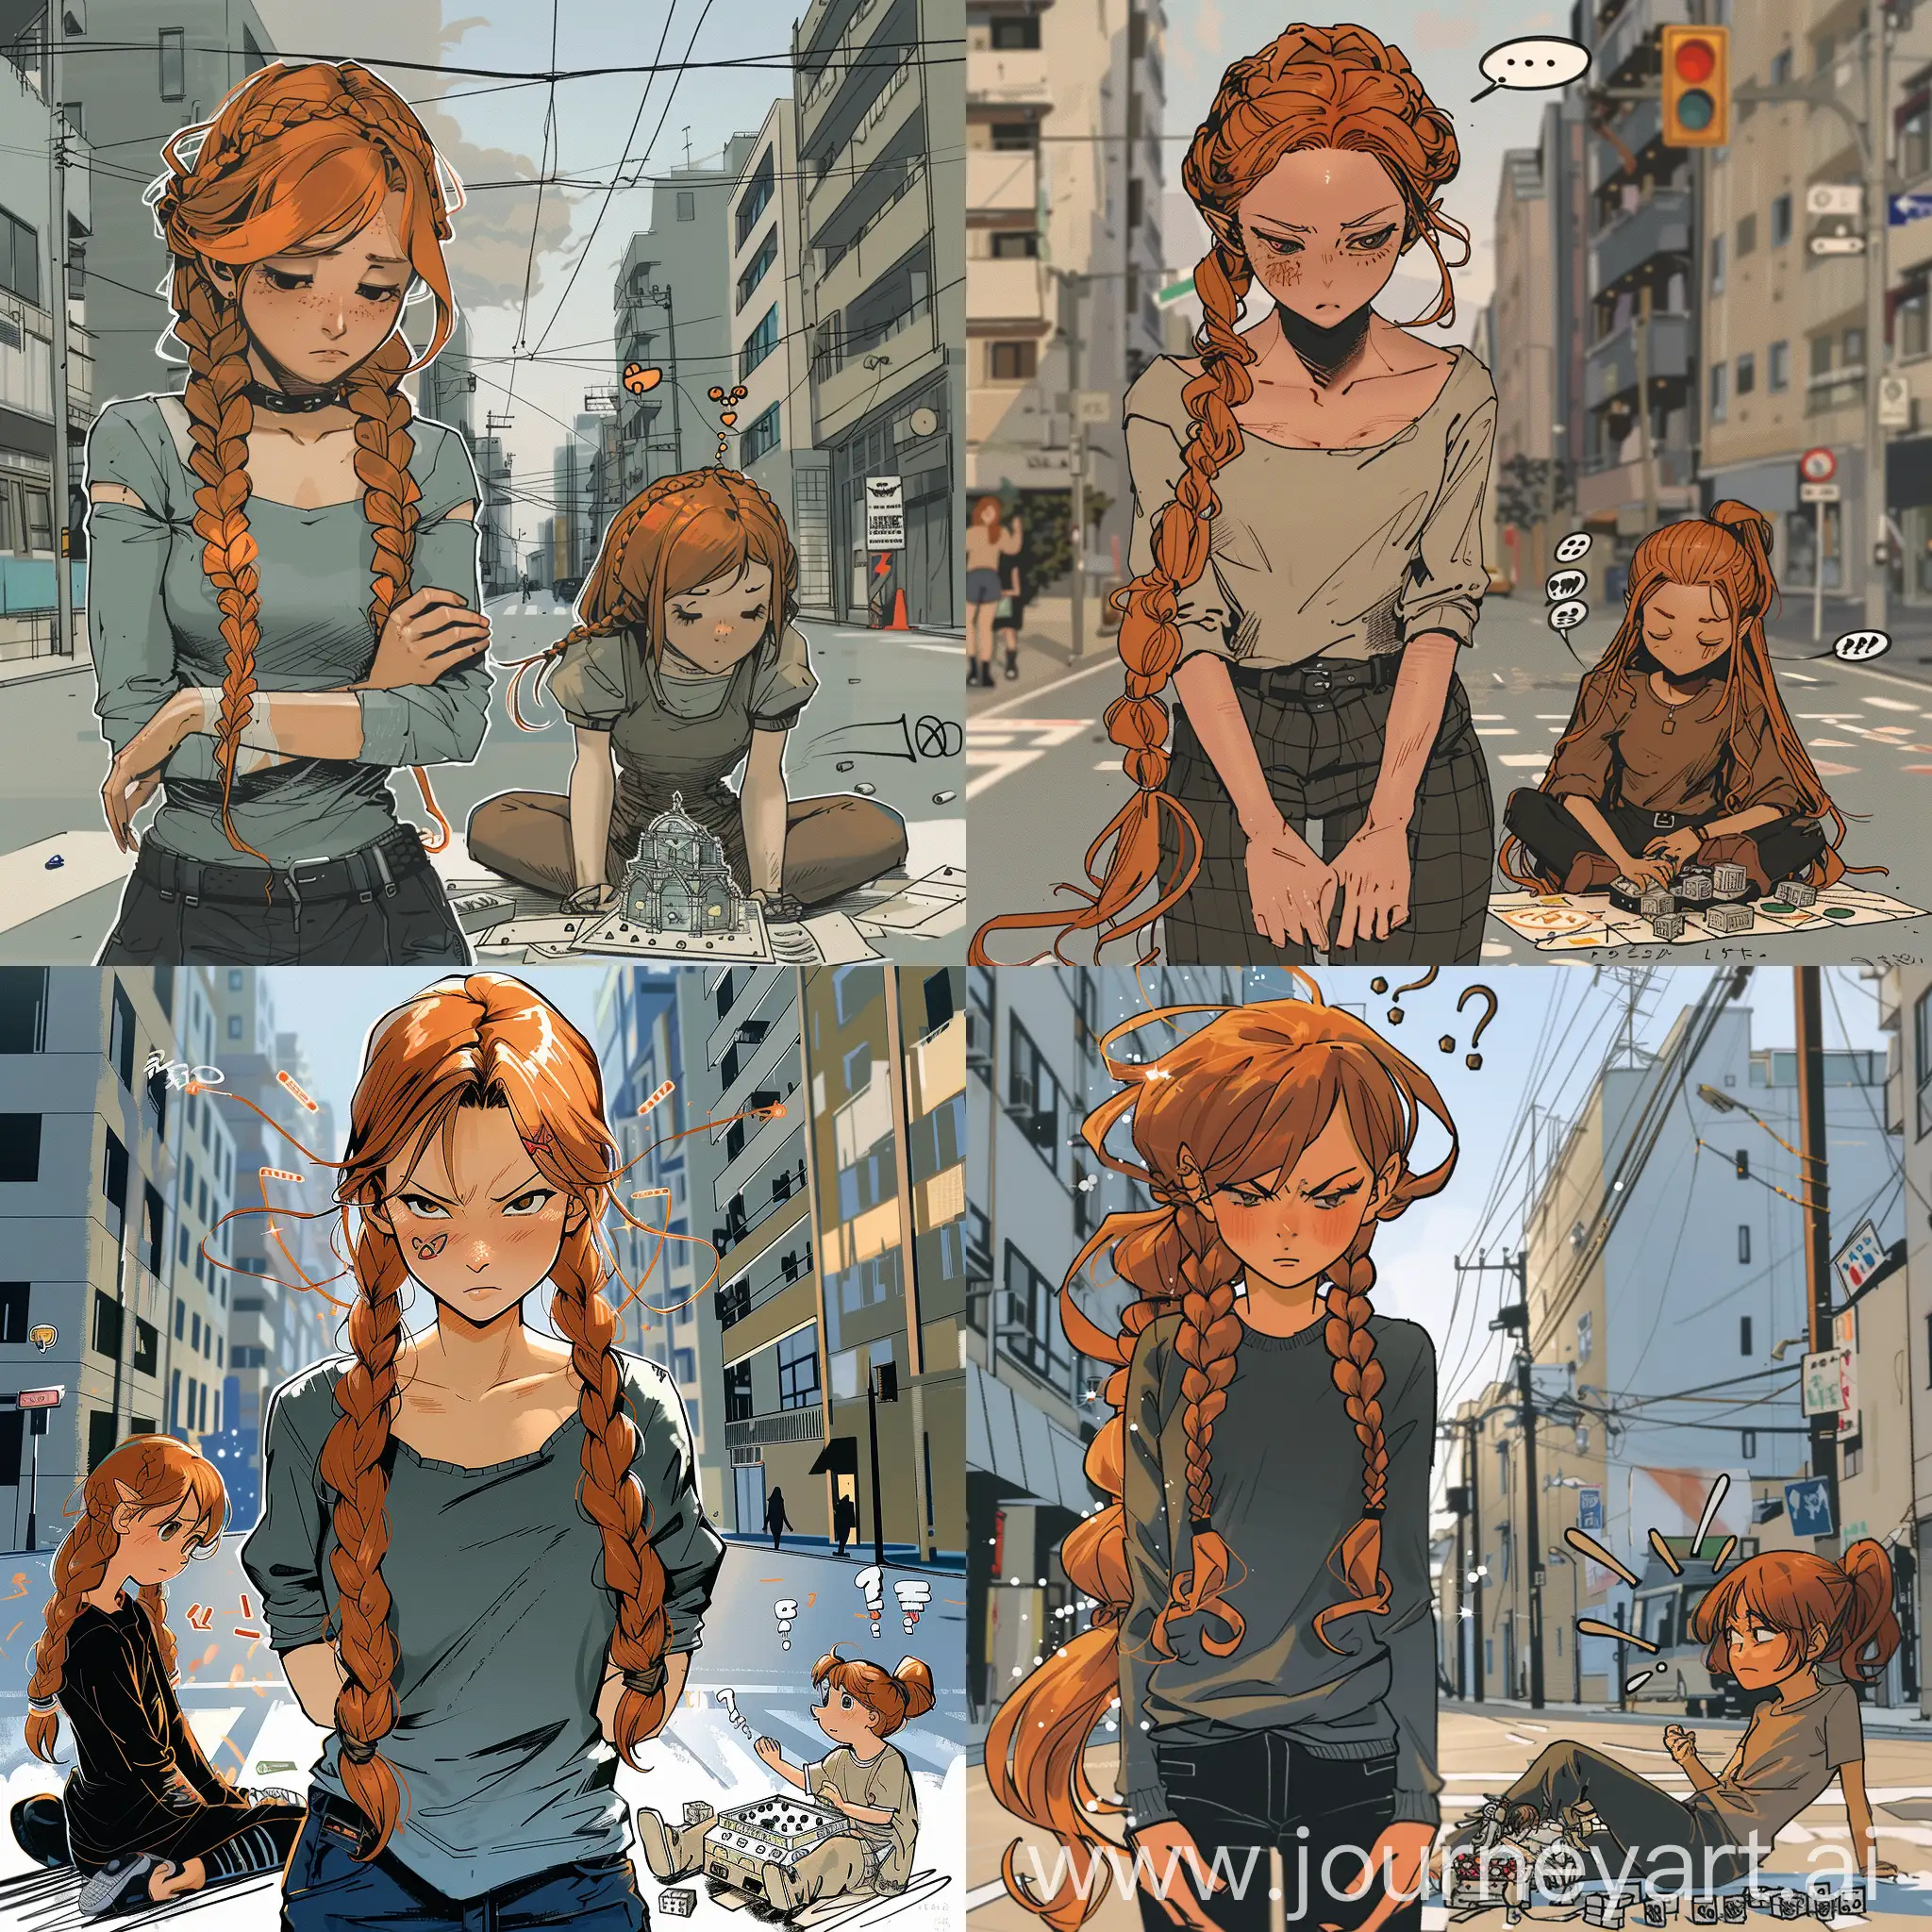 Saturday Afternoon Anime Stle. Colorful and vibrant. A young 25 year old woman, attractive, with ginger hair in long double braids. She is the main focus of the image. She is standing bored looking at her nails, not angry. She is waiting for her friend to finish. She is standing on a street corner in a city. Second character, more bronze colored hair, less detail, black and white, more line drawn, is sitting in a goofy way on the ground playing dungeons and dragons by herself, rolling dice.There are dungeon guides sitting next to her. She has "emotion" marks coming out of her head like a comic/anime. She is goofy happy. It is clear that the first character is the main character and is bored waiting for the second character to finish